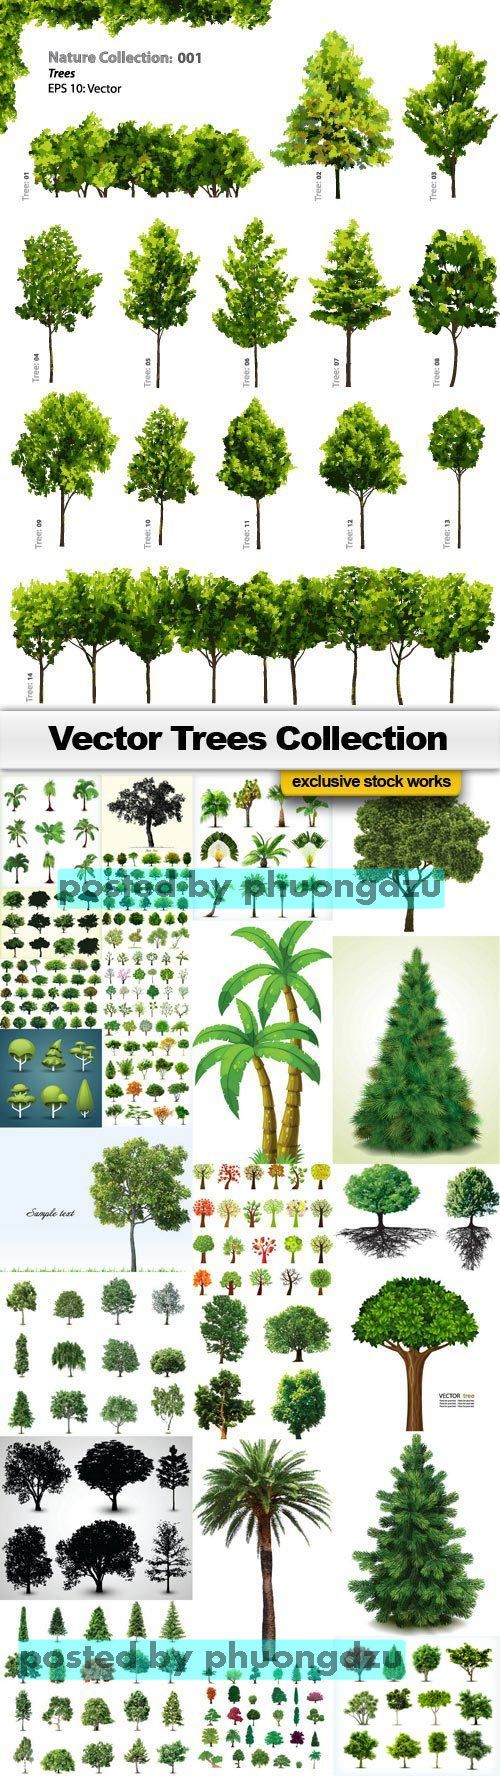 Vector Trees Collection set 1